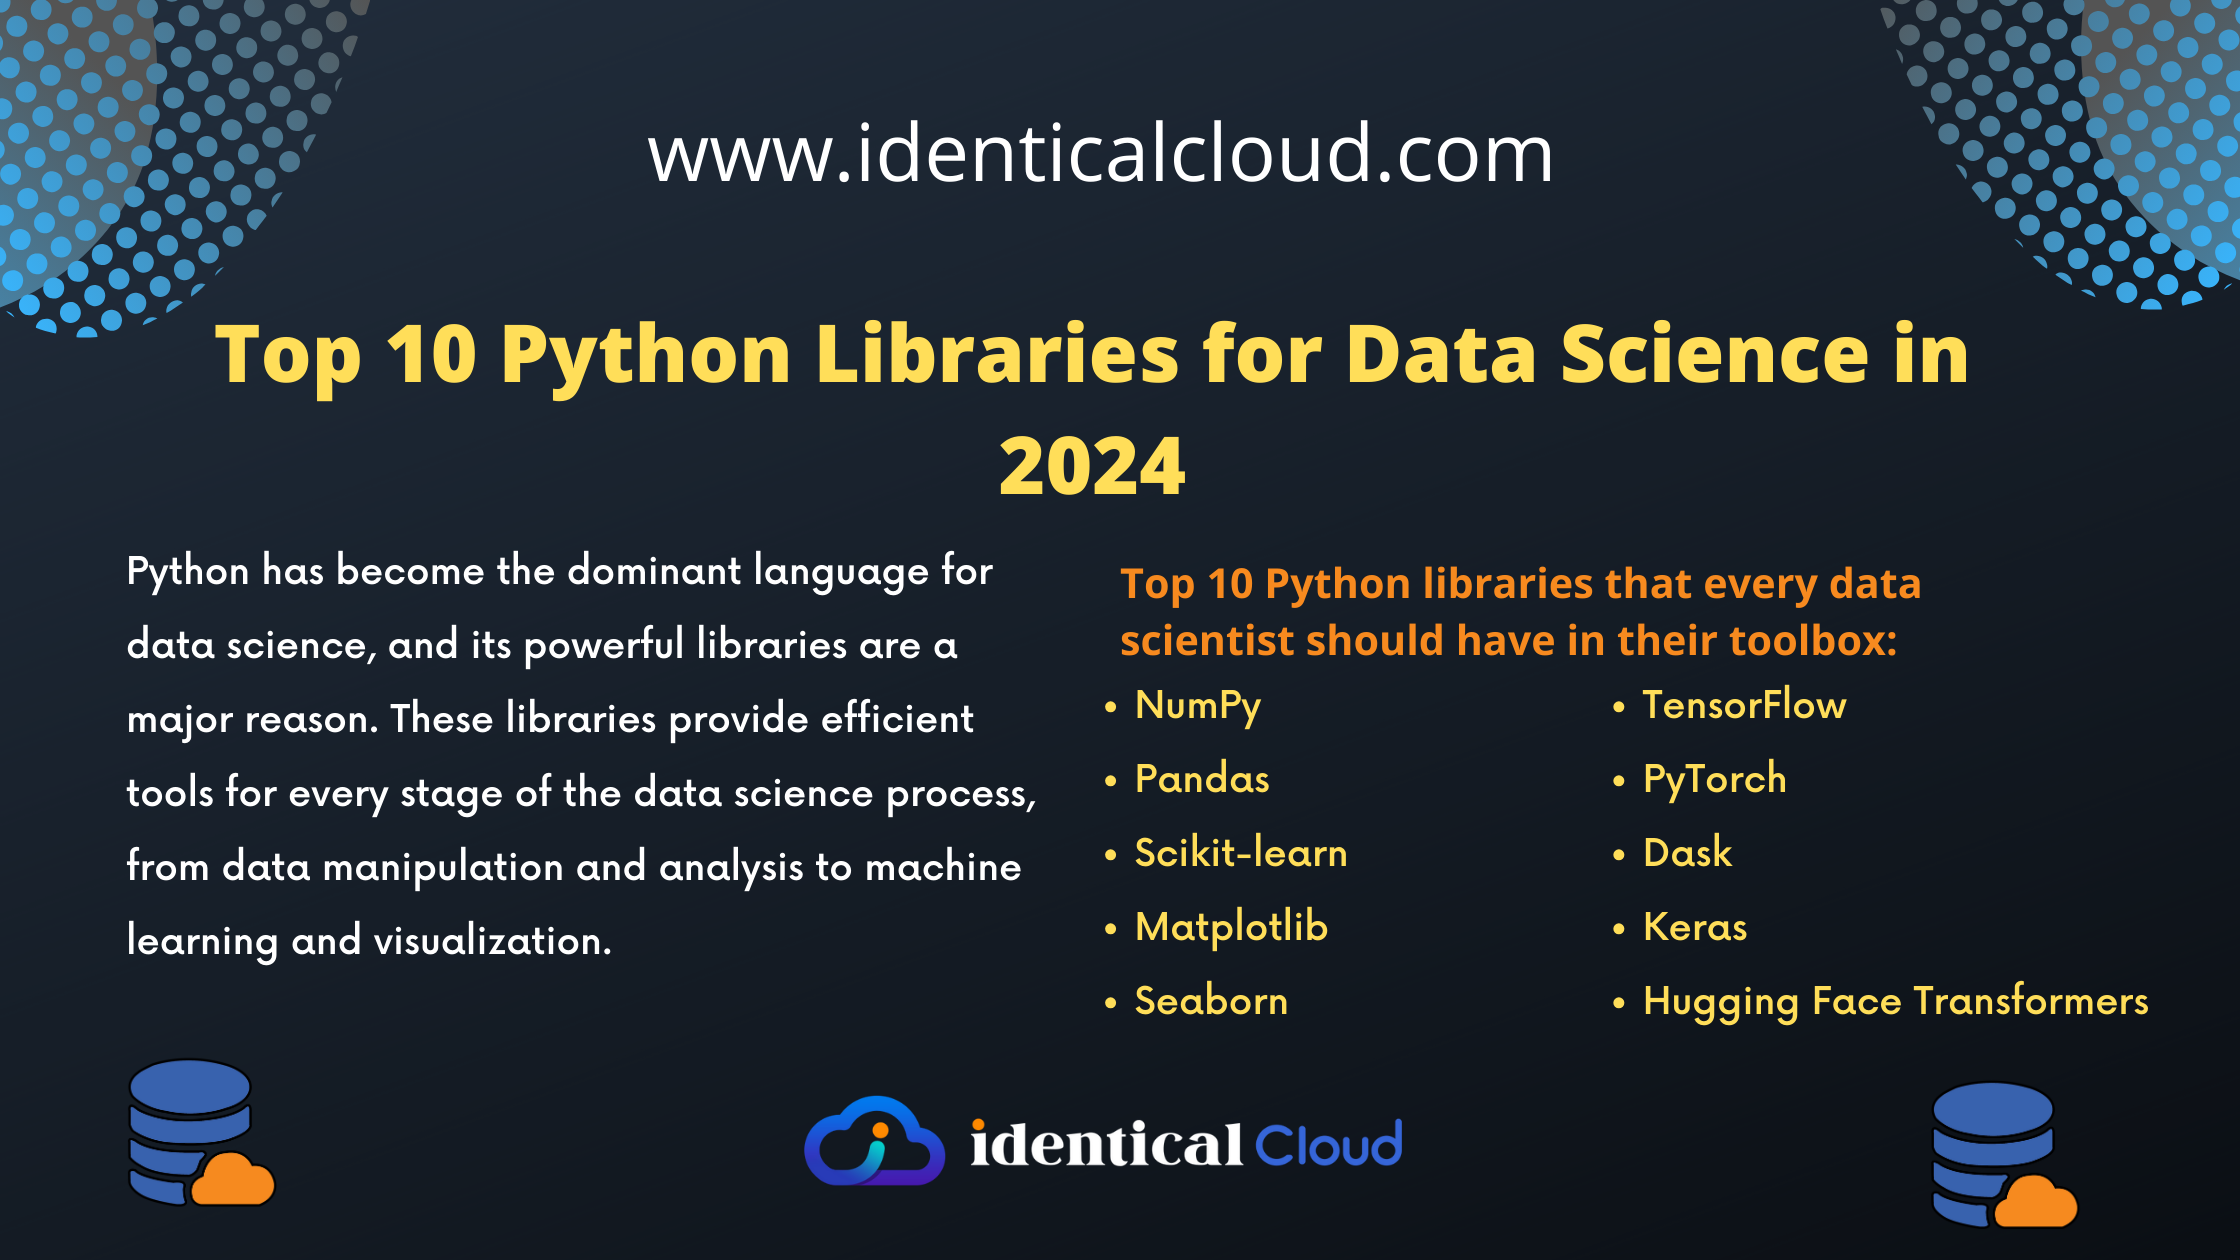 Top 10 Python Libraries for Data Science in 2024 - identicalcloud.com